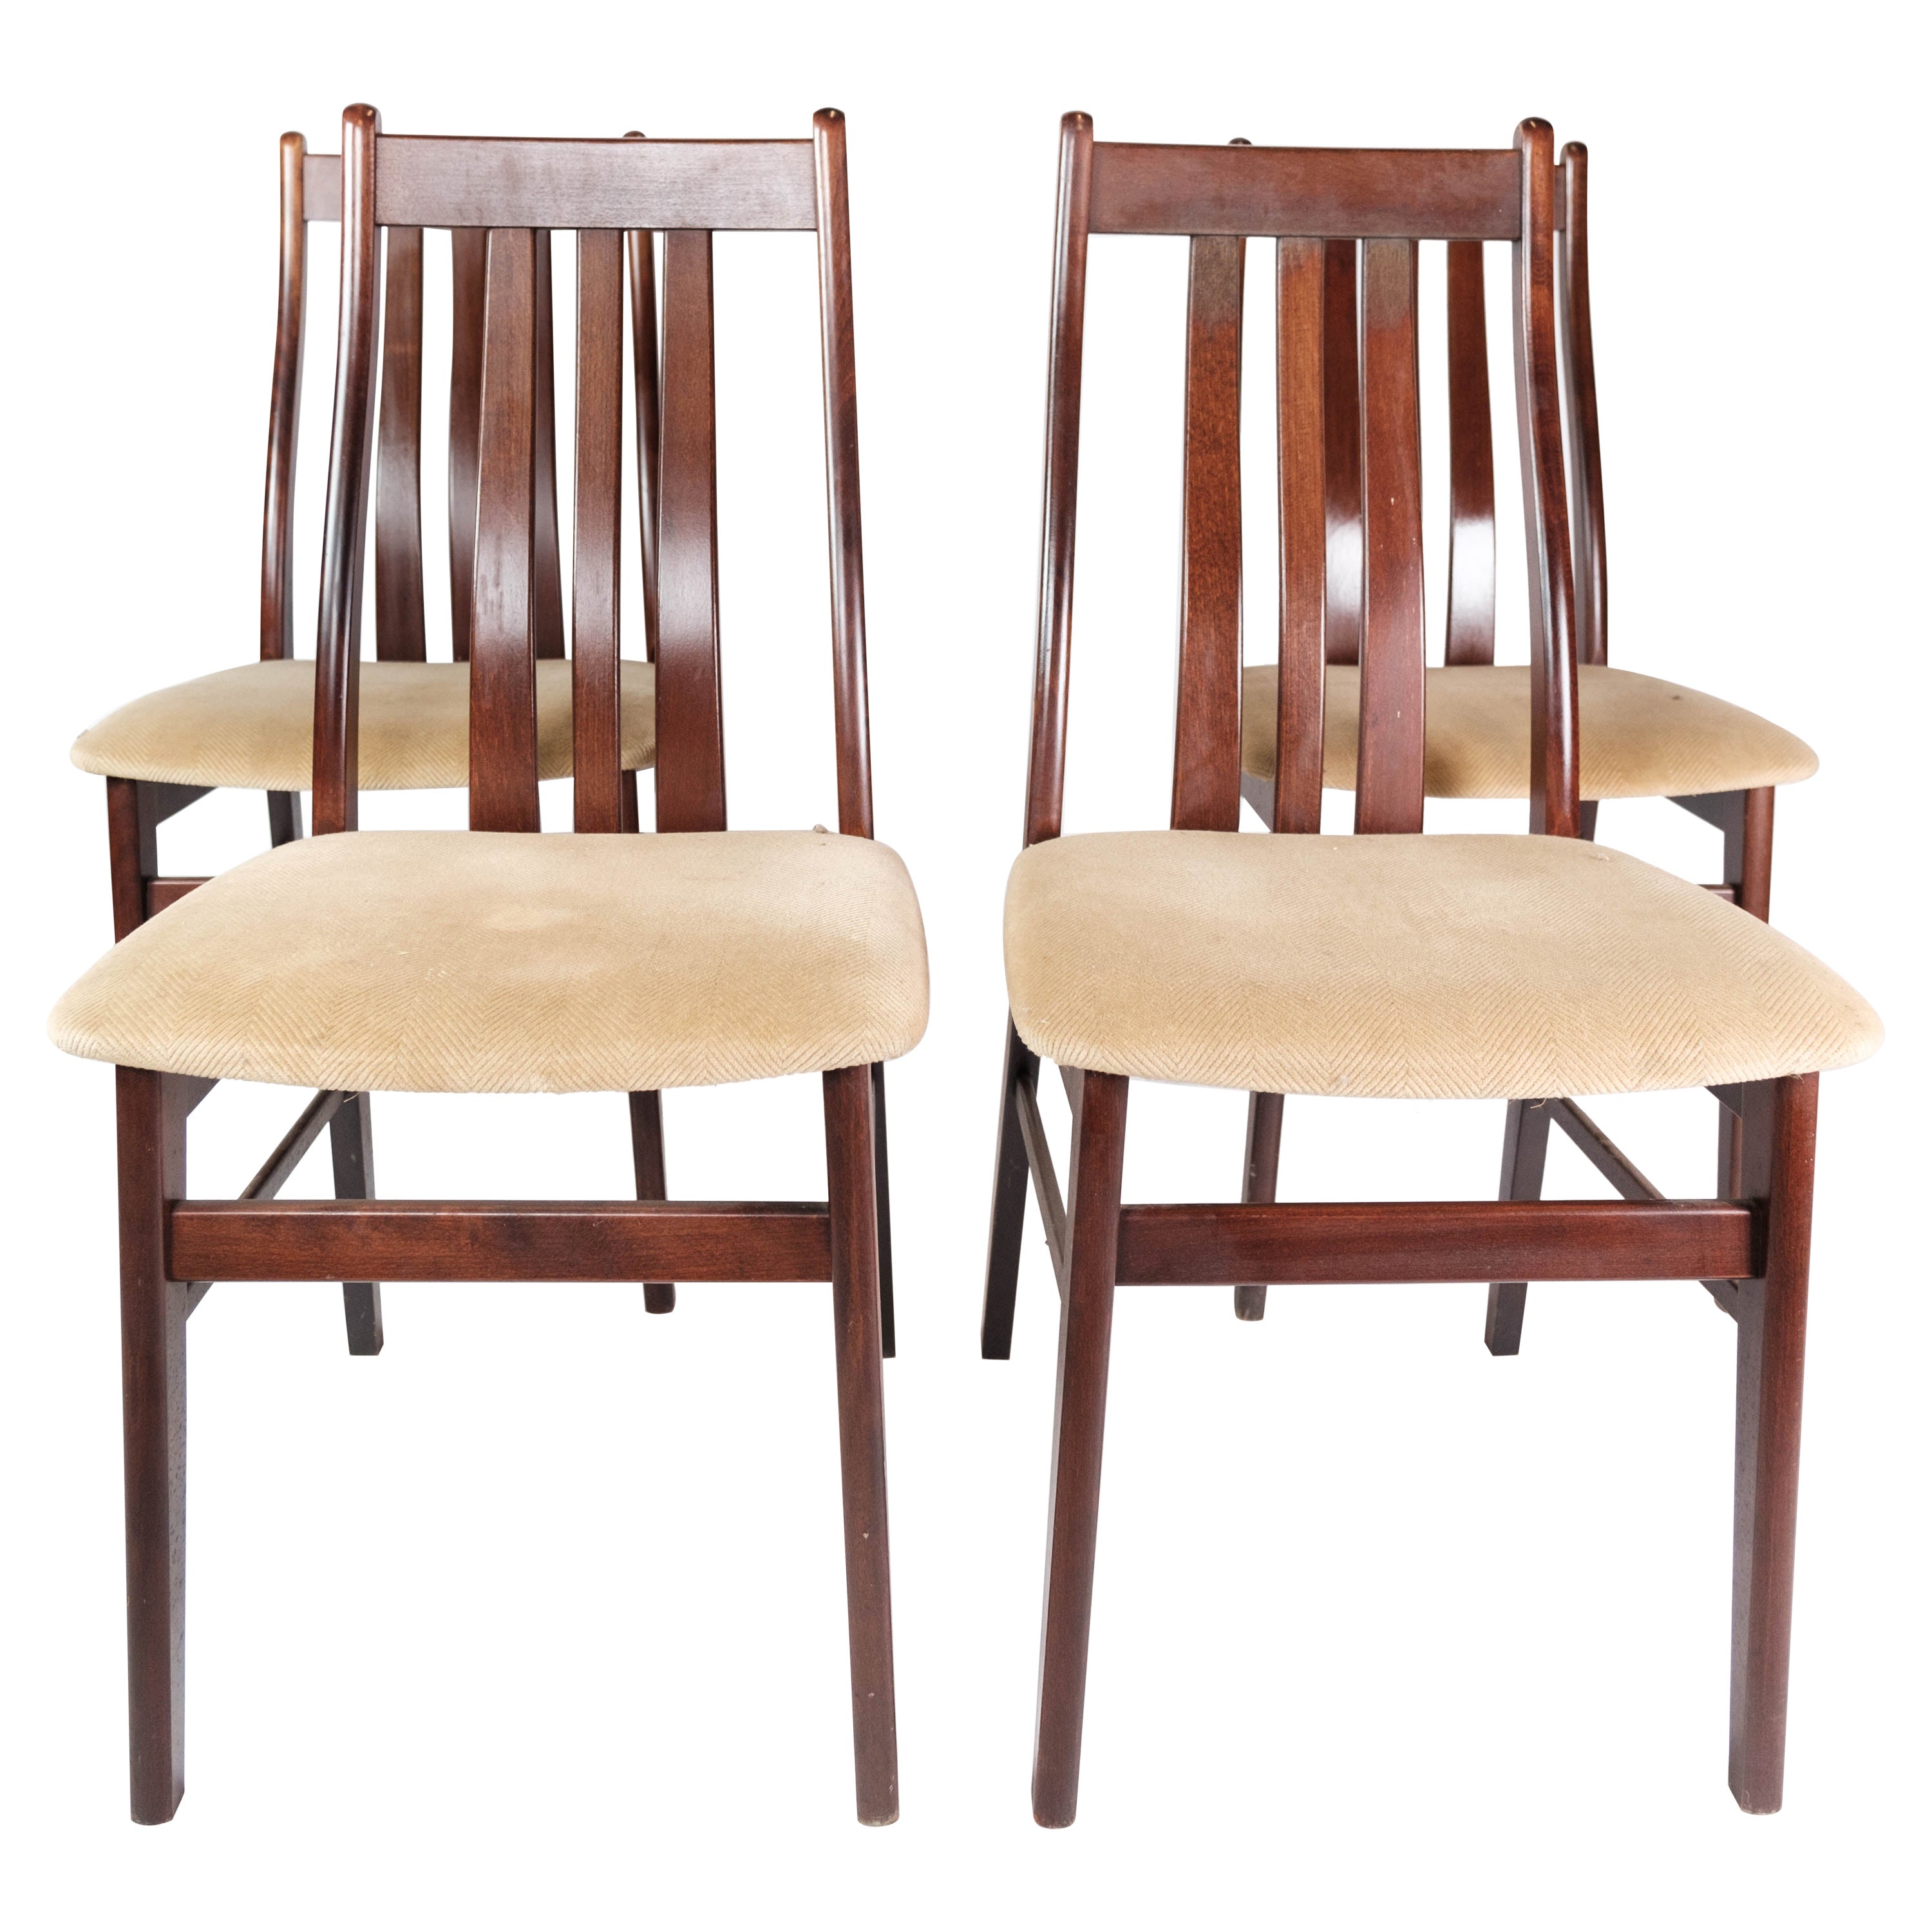 Set of Four Dining Room Chairs Made In Mahogany By Farstrup From 1960s For Sale